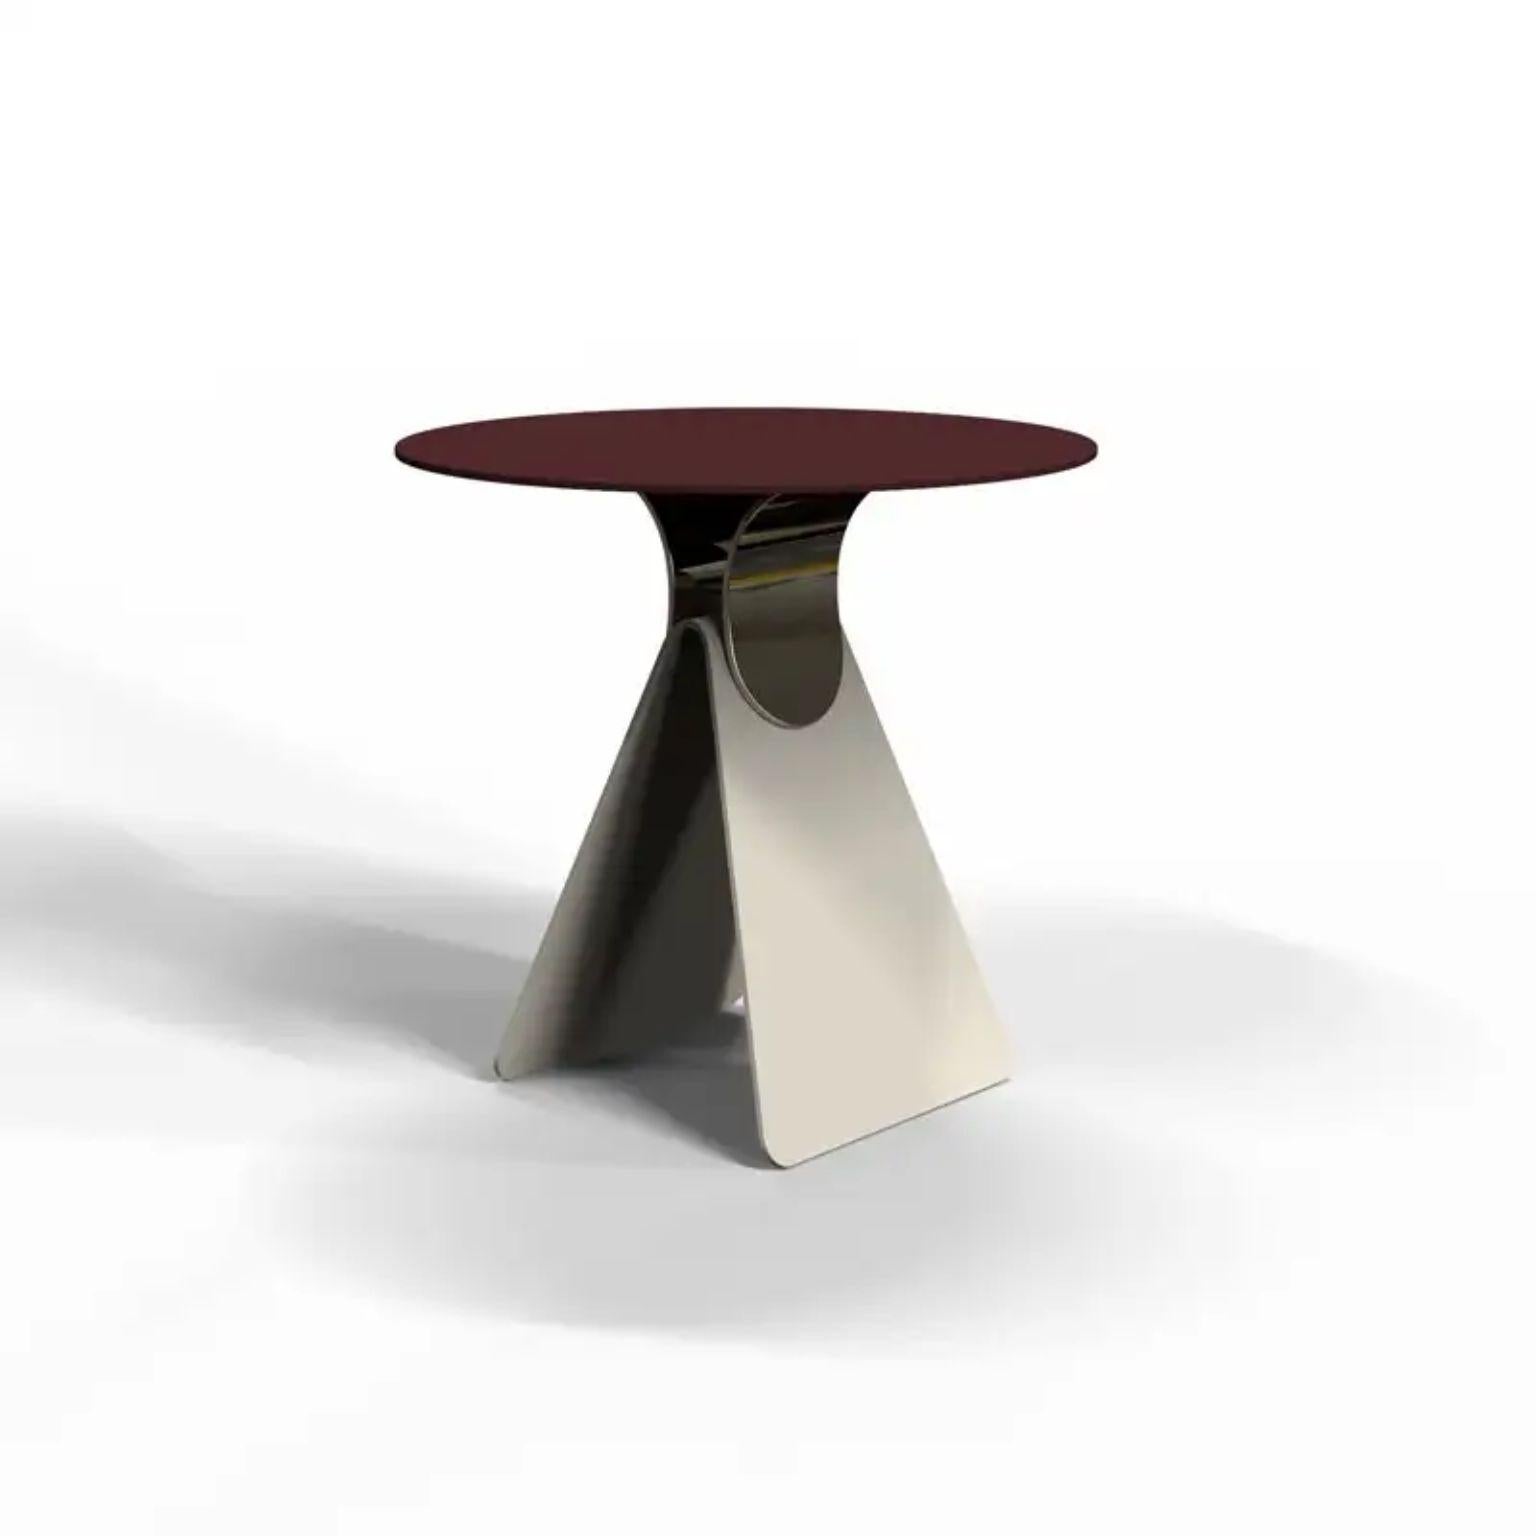 Cipputi Burgundy Coffee Table by Mason Editions
Designed by Quaglio Simonelli.
Dimensions: Ø 50 cm x H 48 cm.
Materials: metal.

Available in different colors. 

Cipputi is a side table designed by metal sheets that fold and assemble to